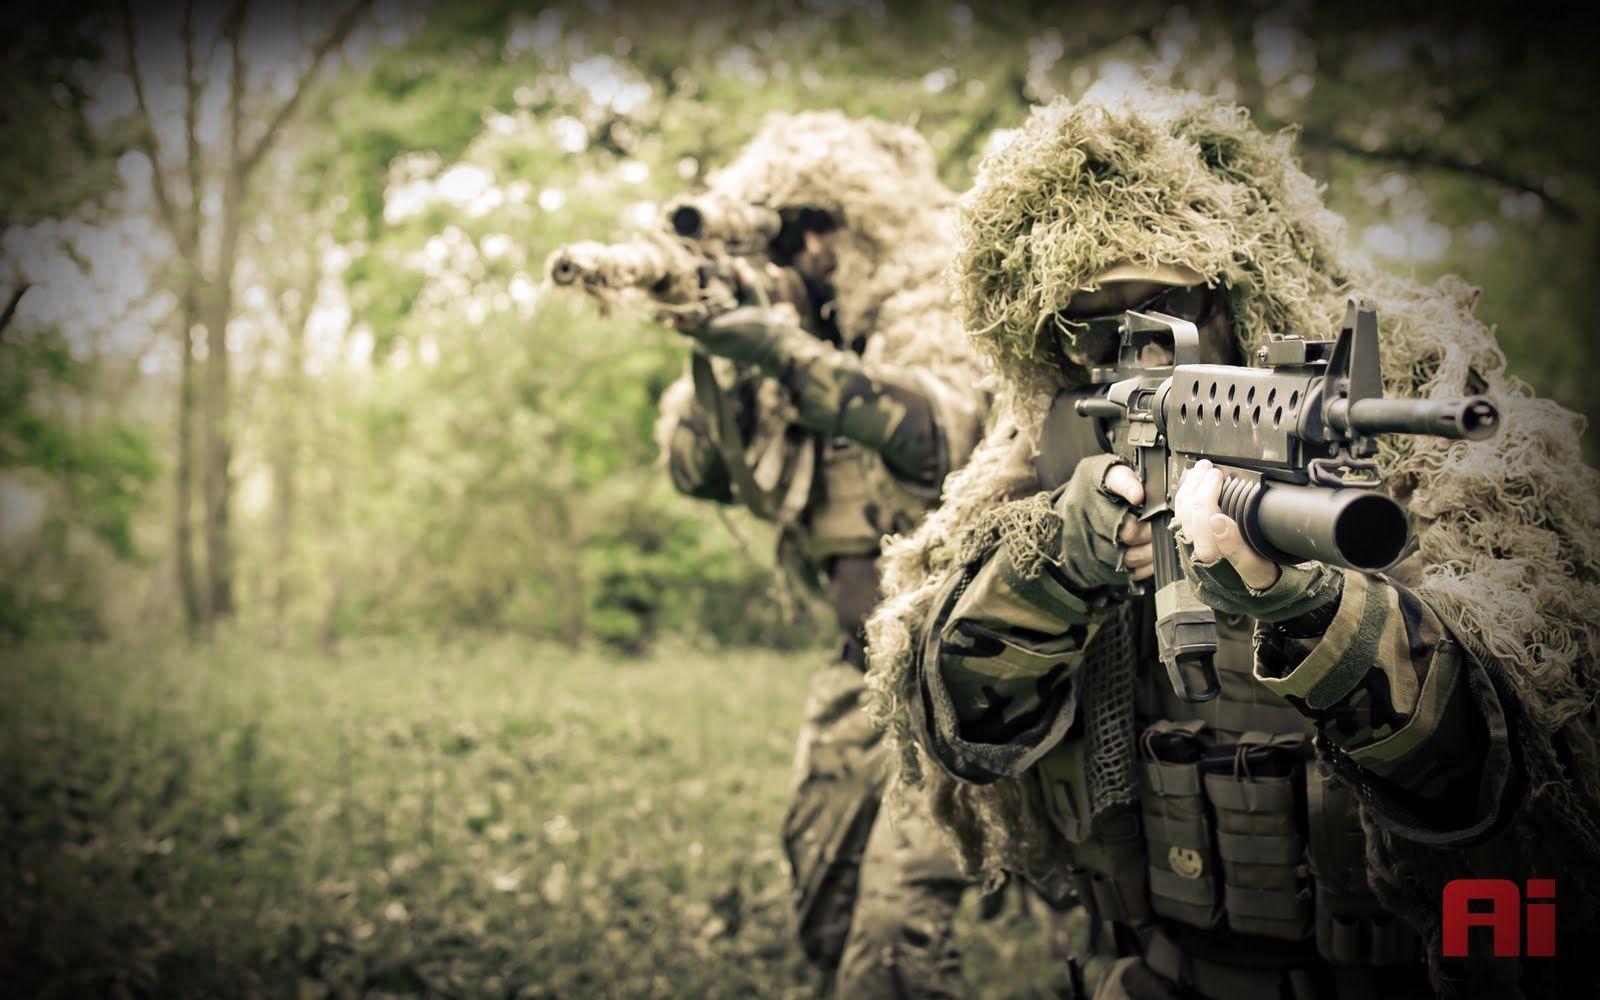 Special Wallpaper Styles from UF PRO  Airsoft  Milsim News